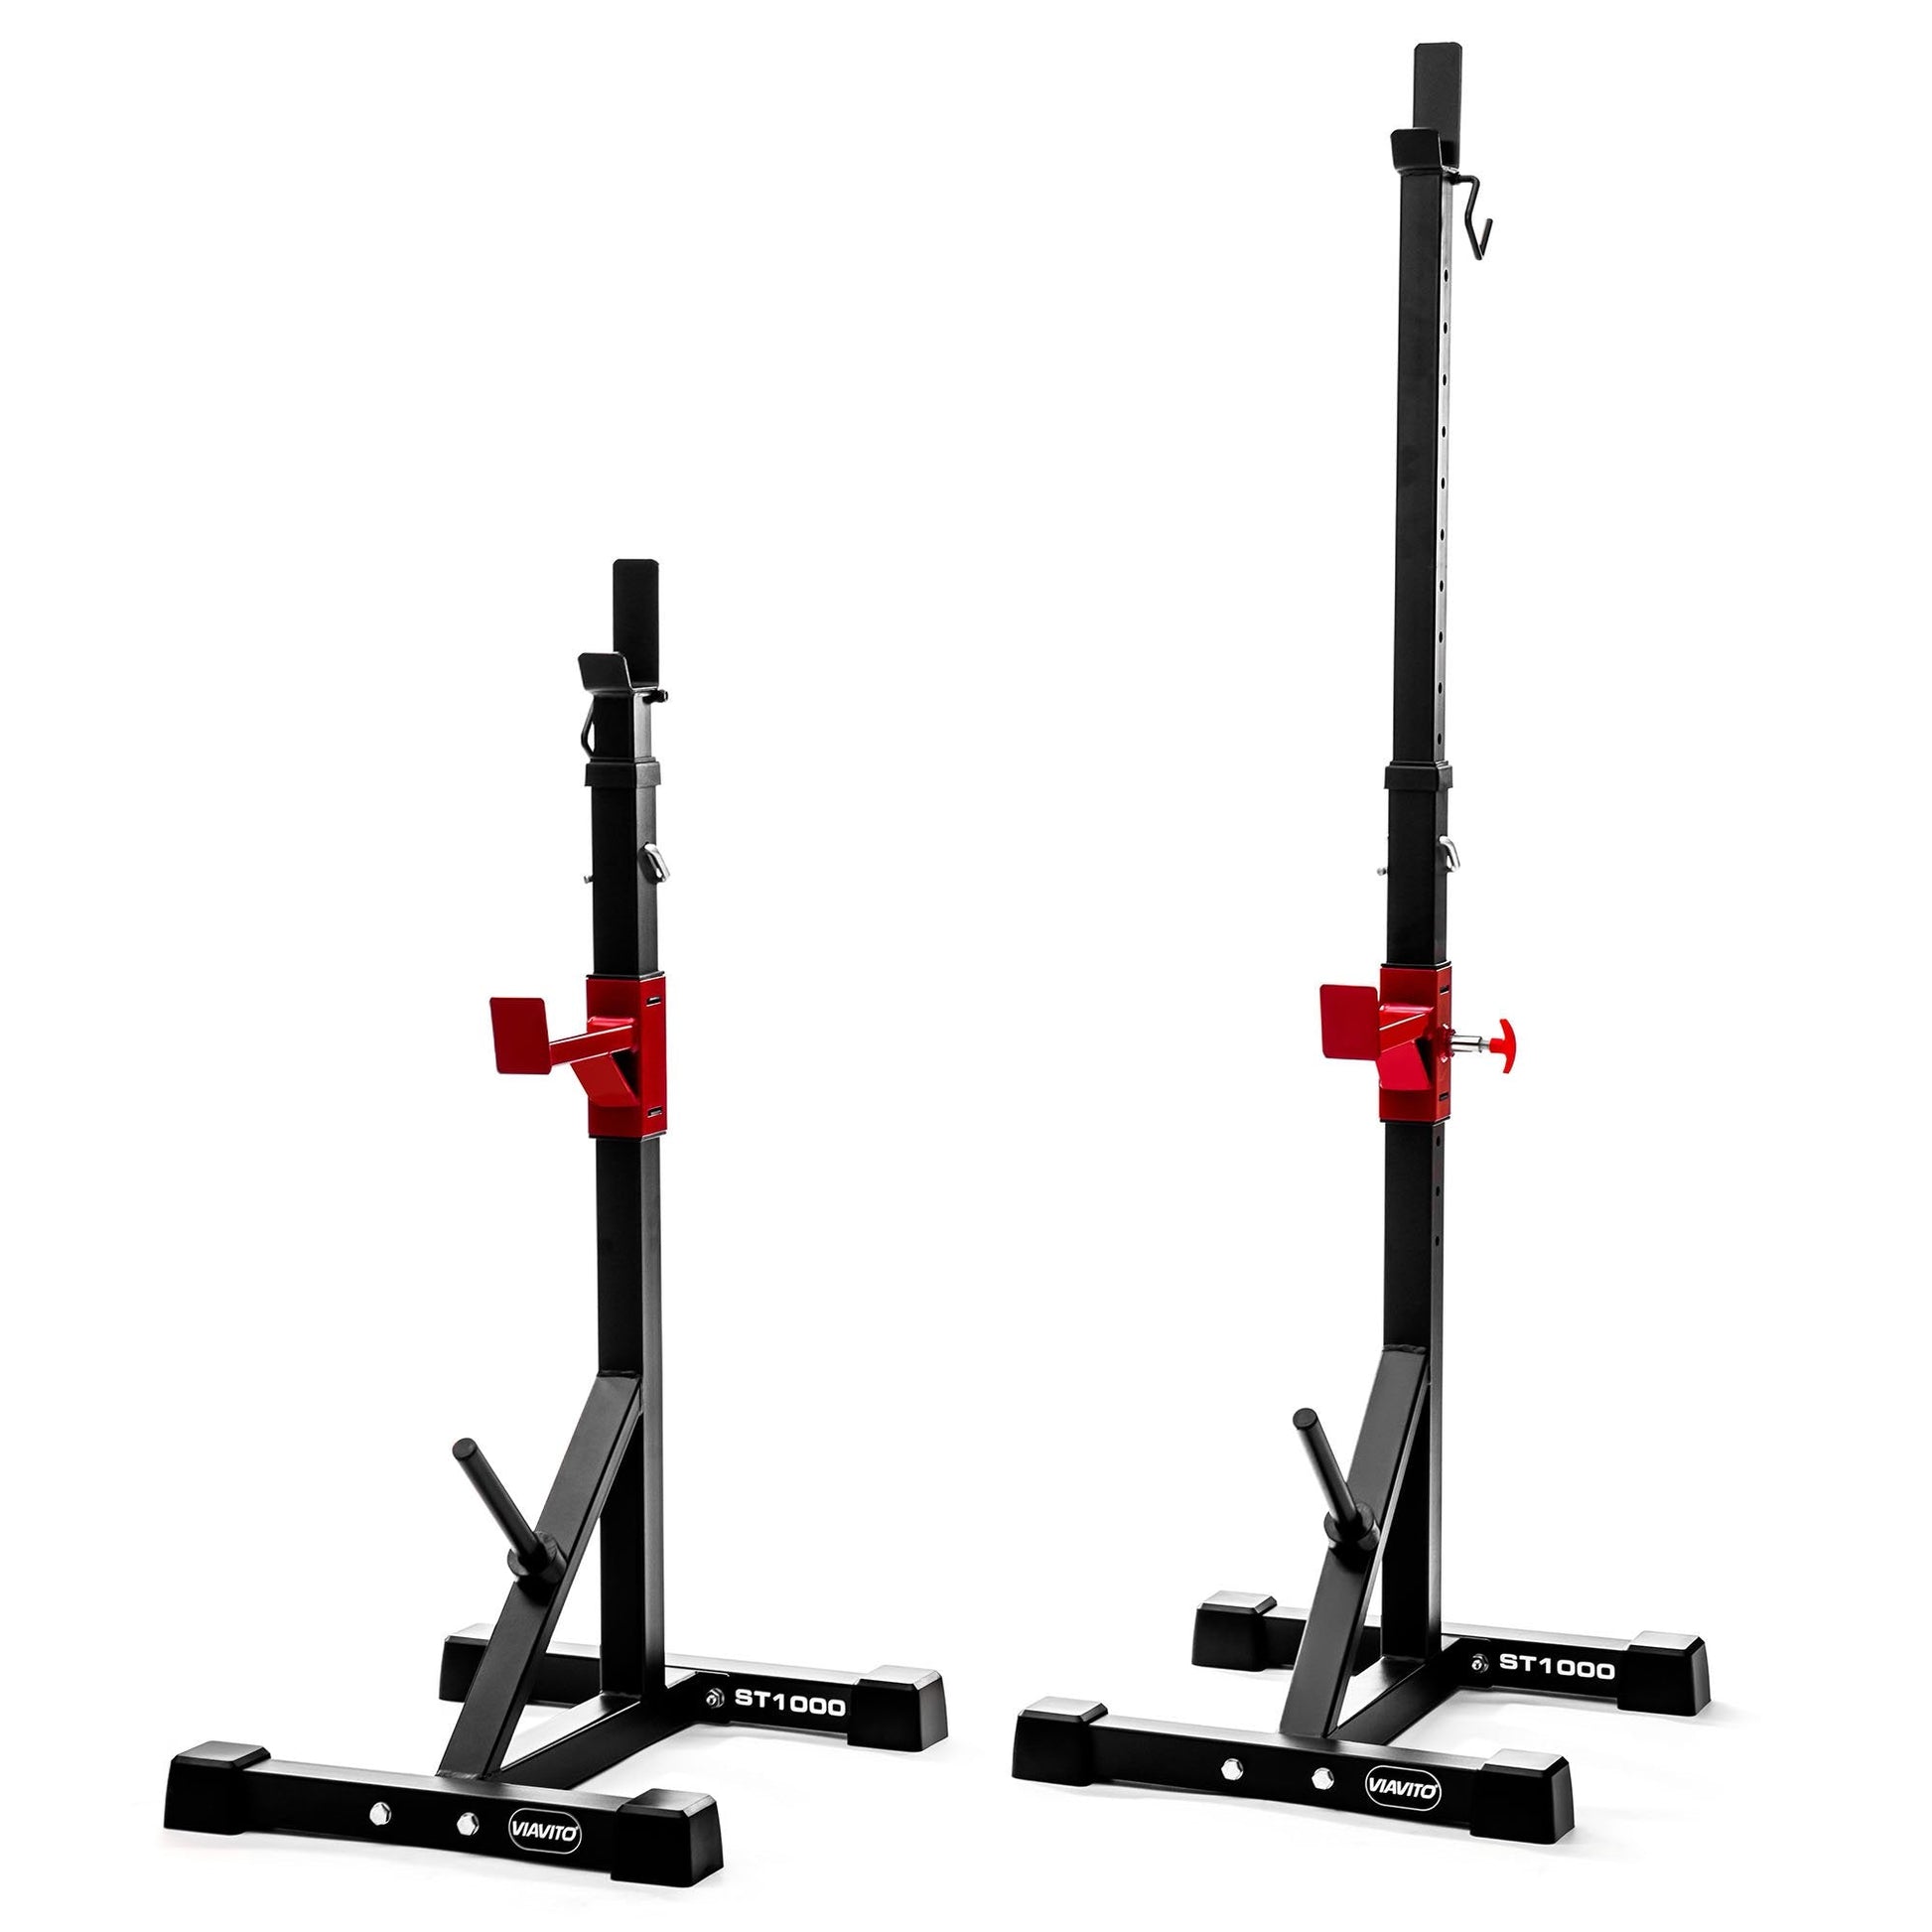 |Viavito ST1000 Adjustable Squat Stands with Barbell Spotter Catchers - Folded|